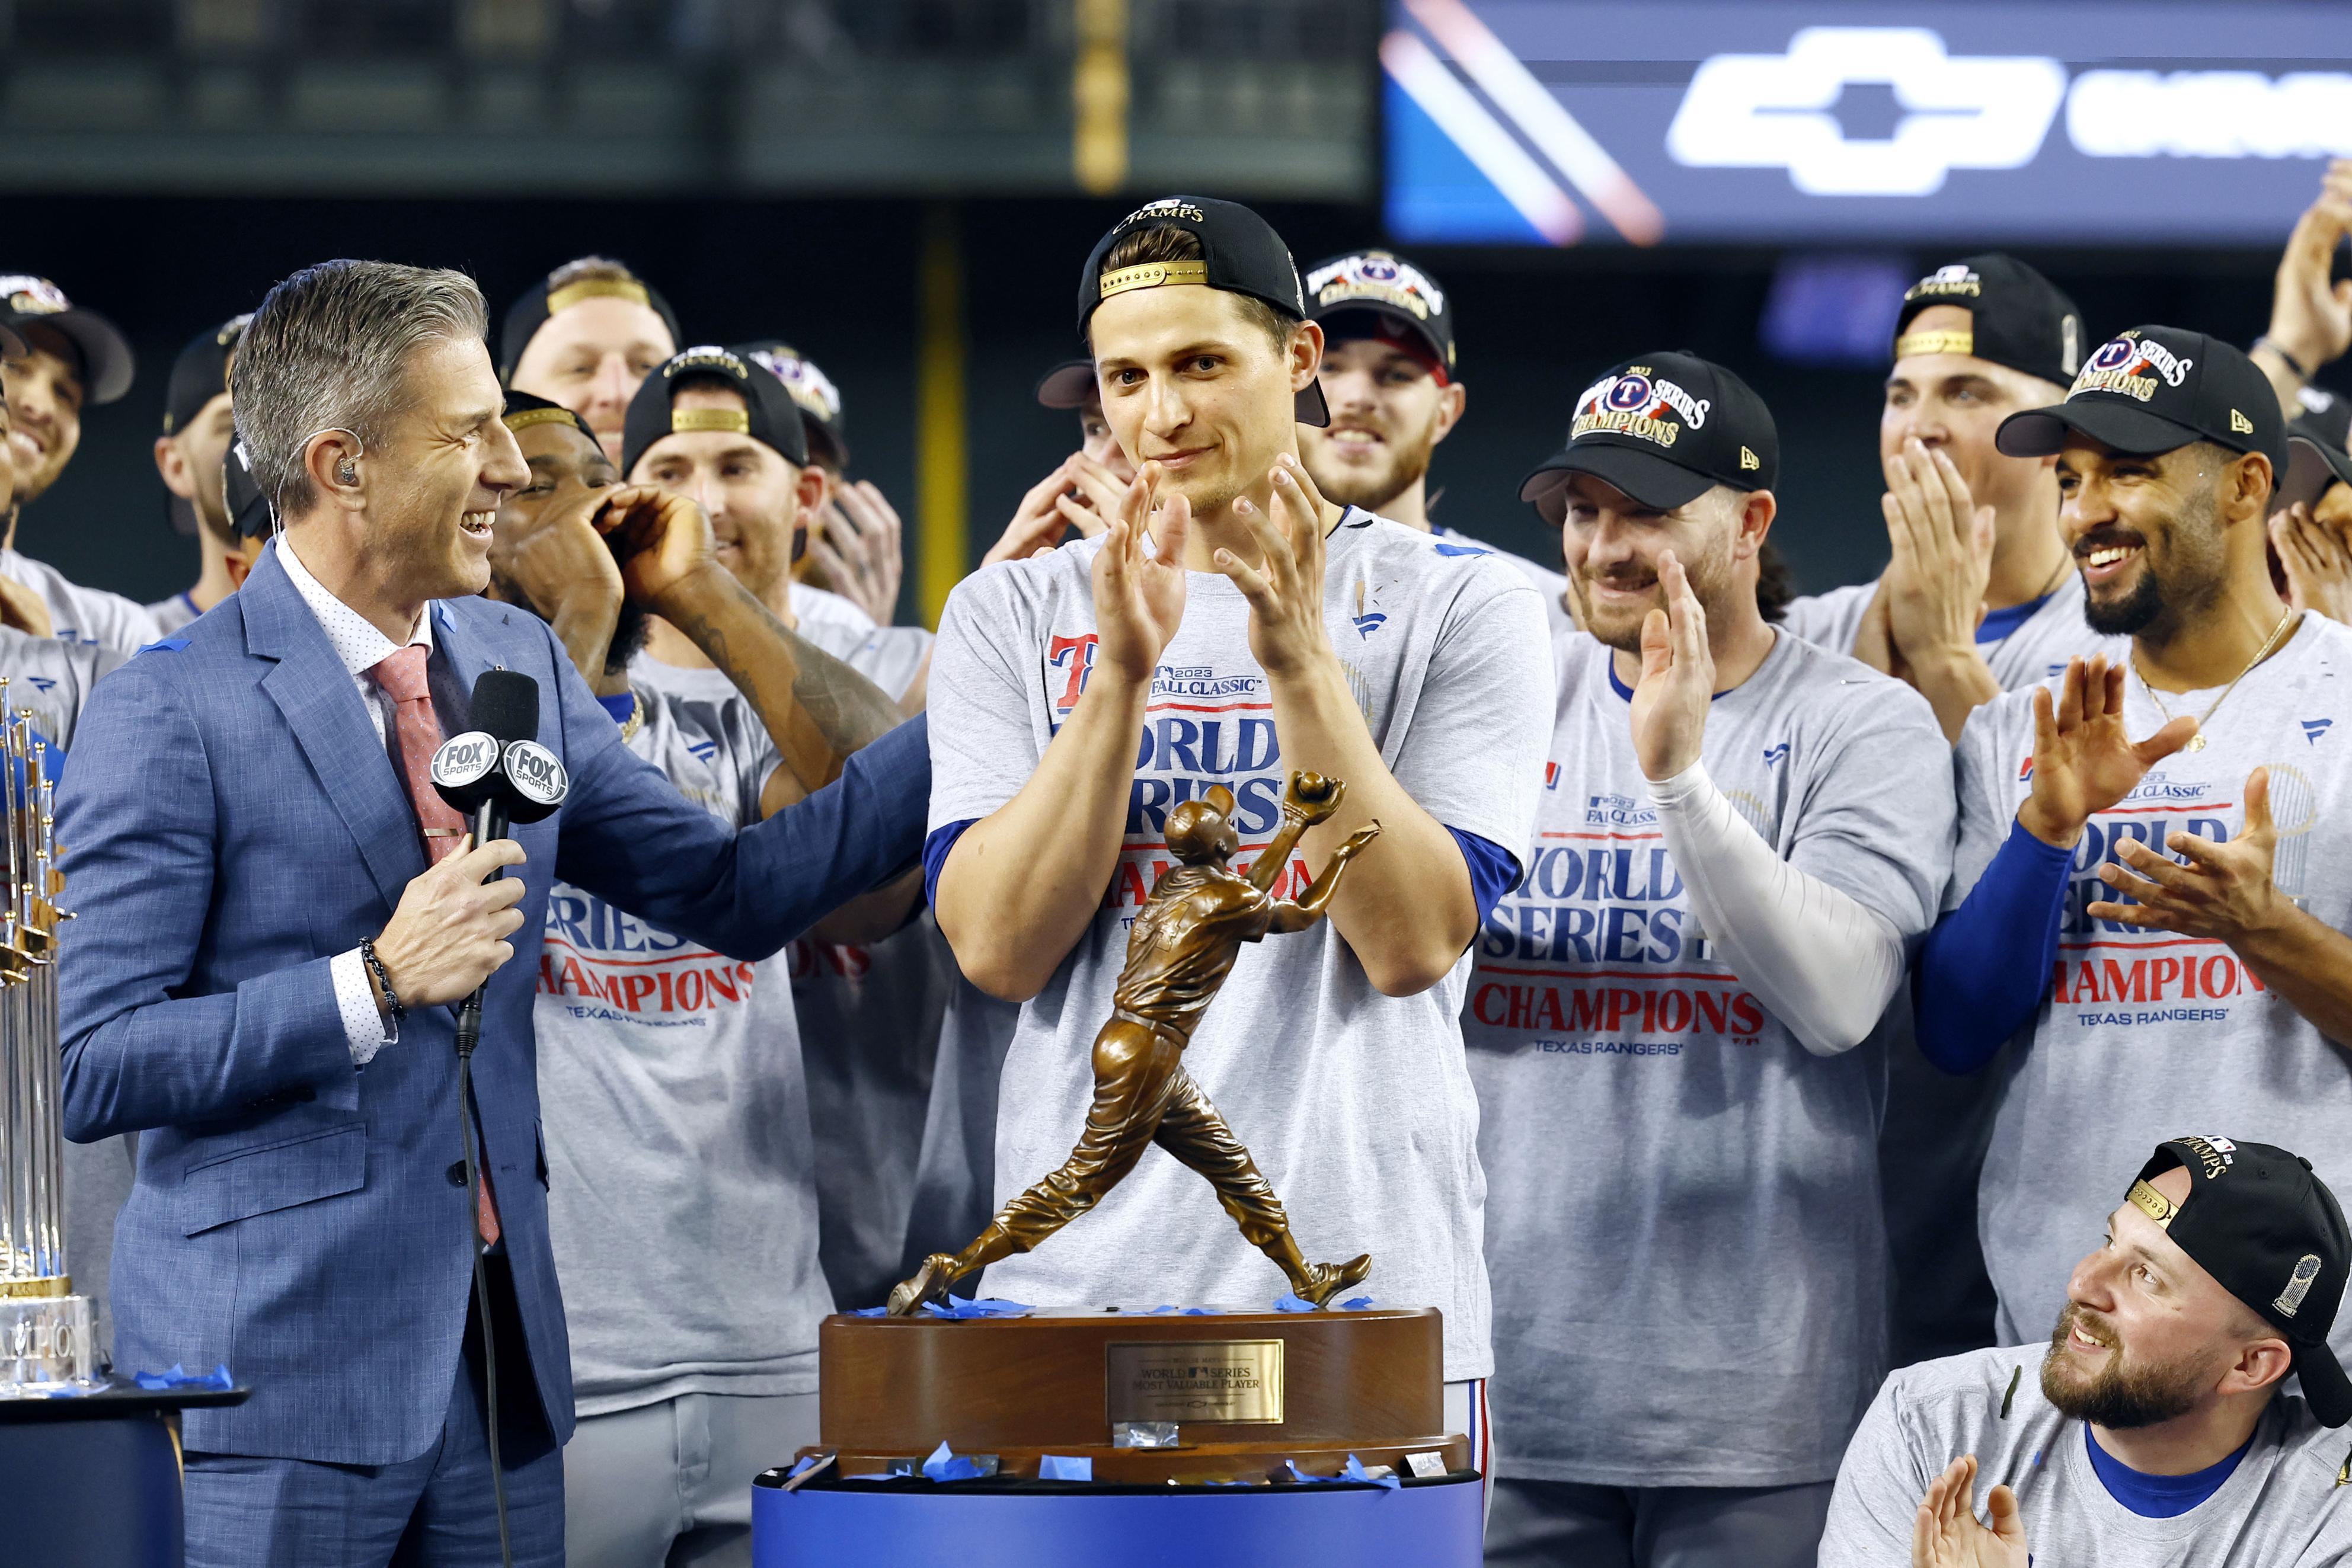 Corey Seager (C) of the texas Rangers is named the World Series Most Valuable Player after their 5-0 win over the Arizona Diamondbacks in Game 5 of the World Series at Chase Field in Phoenix, Arizona, November 1, 2023. /CFP